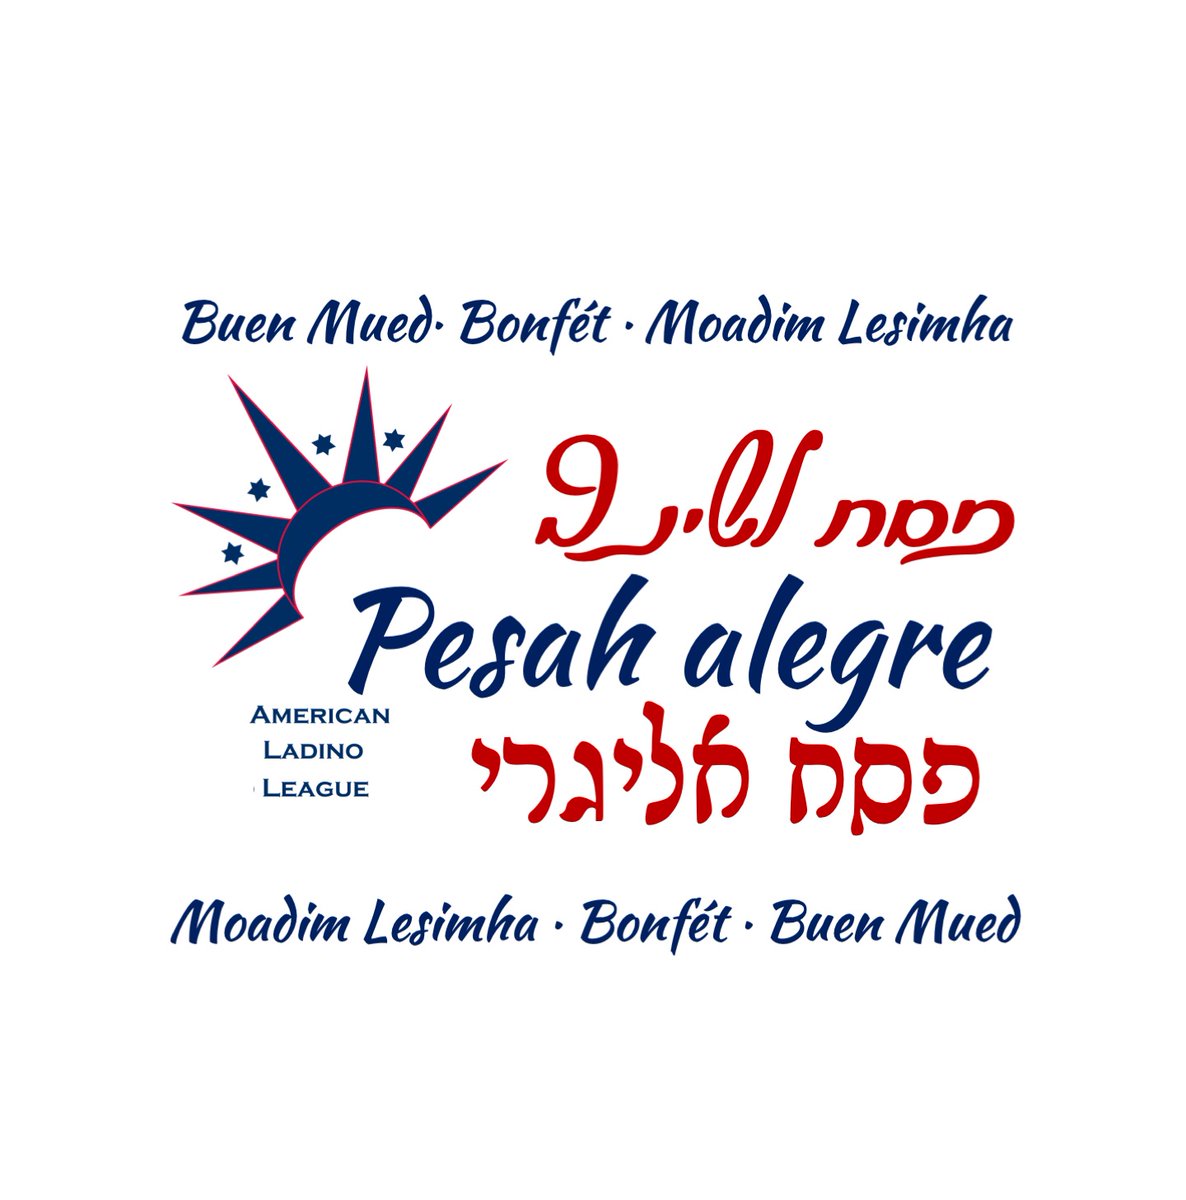 However you say it, spell it or observe it, #Pesah Alegre to all those celebrating! #BuenMued #Bonfet, #MoadimLesimha #PesahAlegre #HappyPassover #Ladino